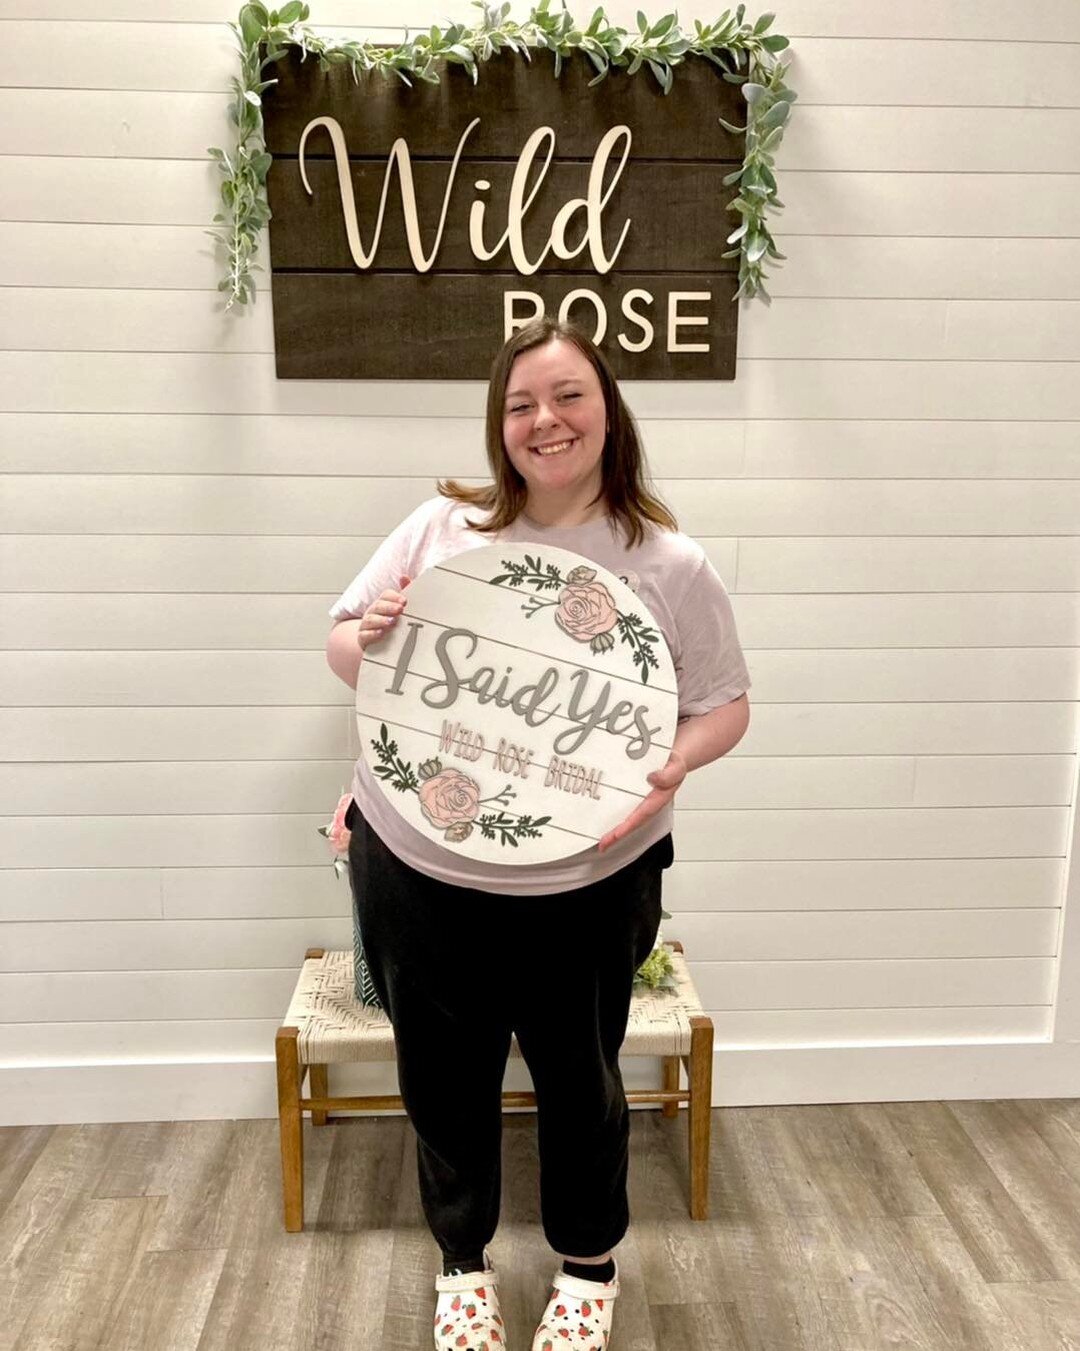 Congratulations Makinzi!! We had so much fun helping you today. You looked stunning in your PERFECT dress 😍✨ 
Thank you for choosing Wild Rose!🌹

#wildrosebridal